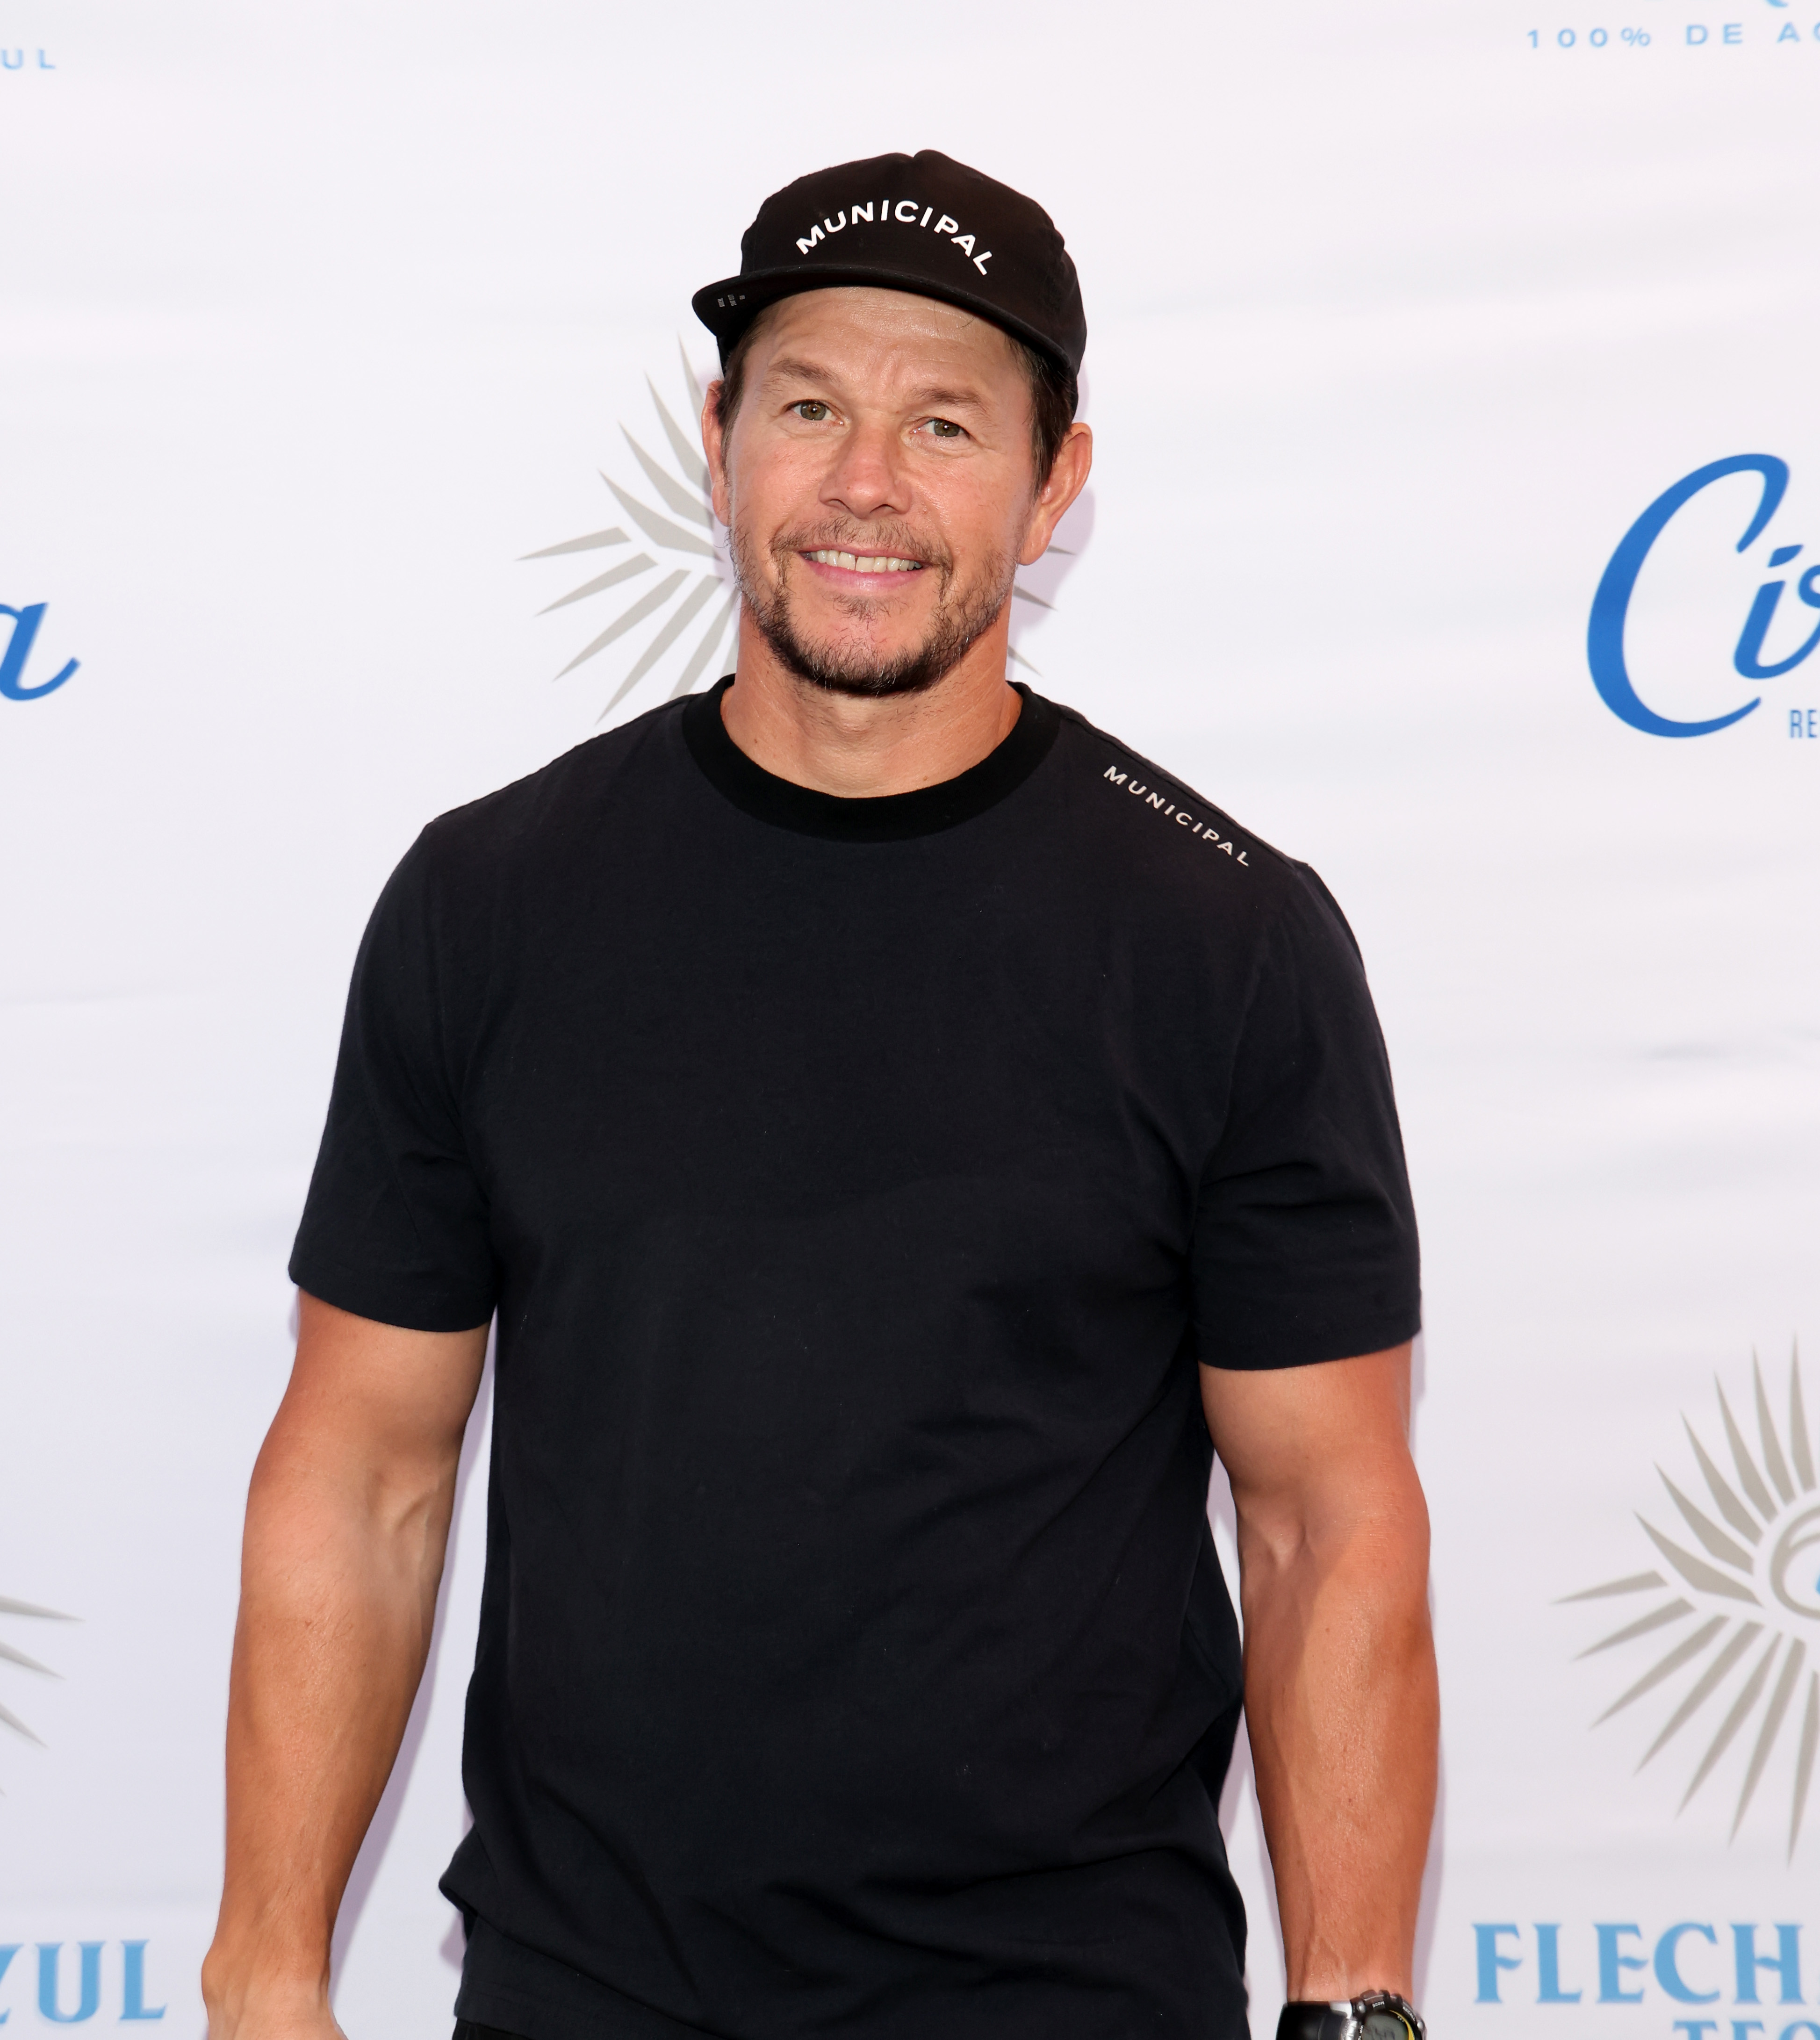 Wahlberg and his co-defendants claim the allegations of 'fraudulent conduct' are baseless and have asked a judge to dismiss the lawsuit